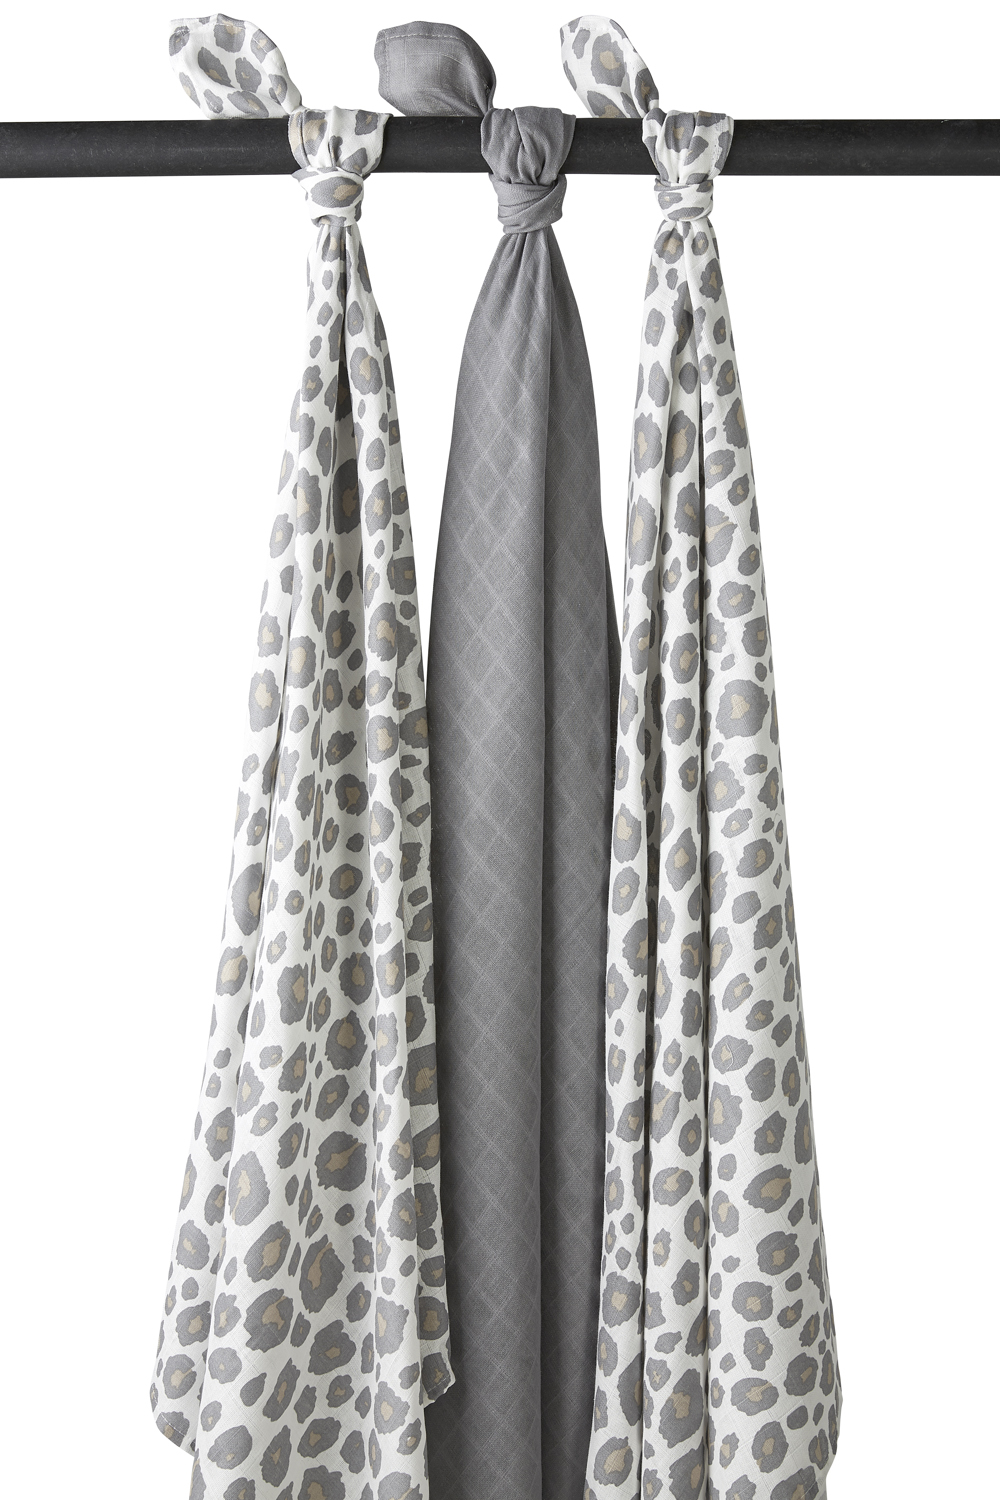 Muslin Swaddles 3-Pack Panther - Panther Neutral/Uni Grey/Panther Neutral - 120X120cm